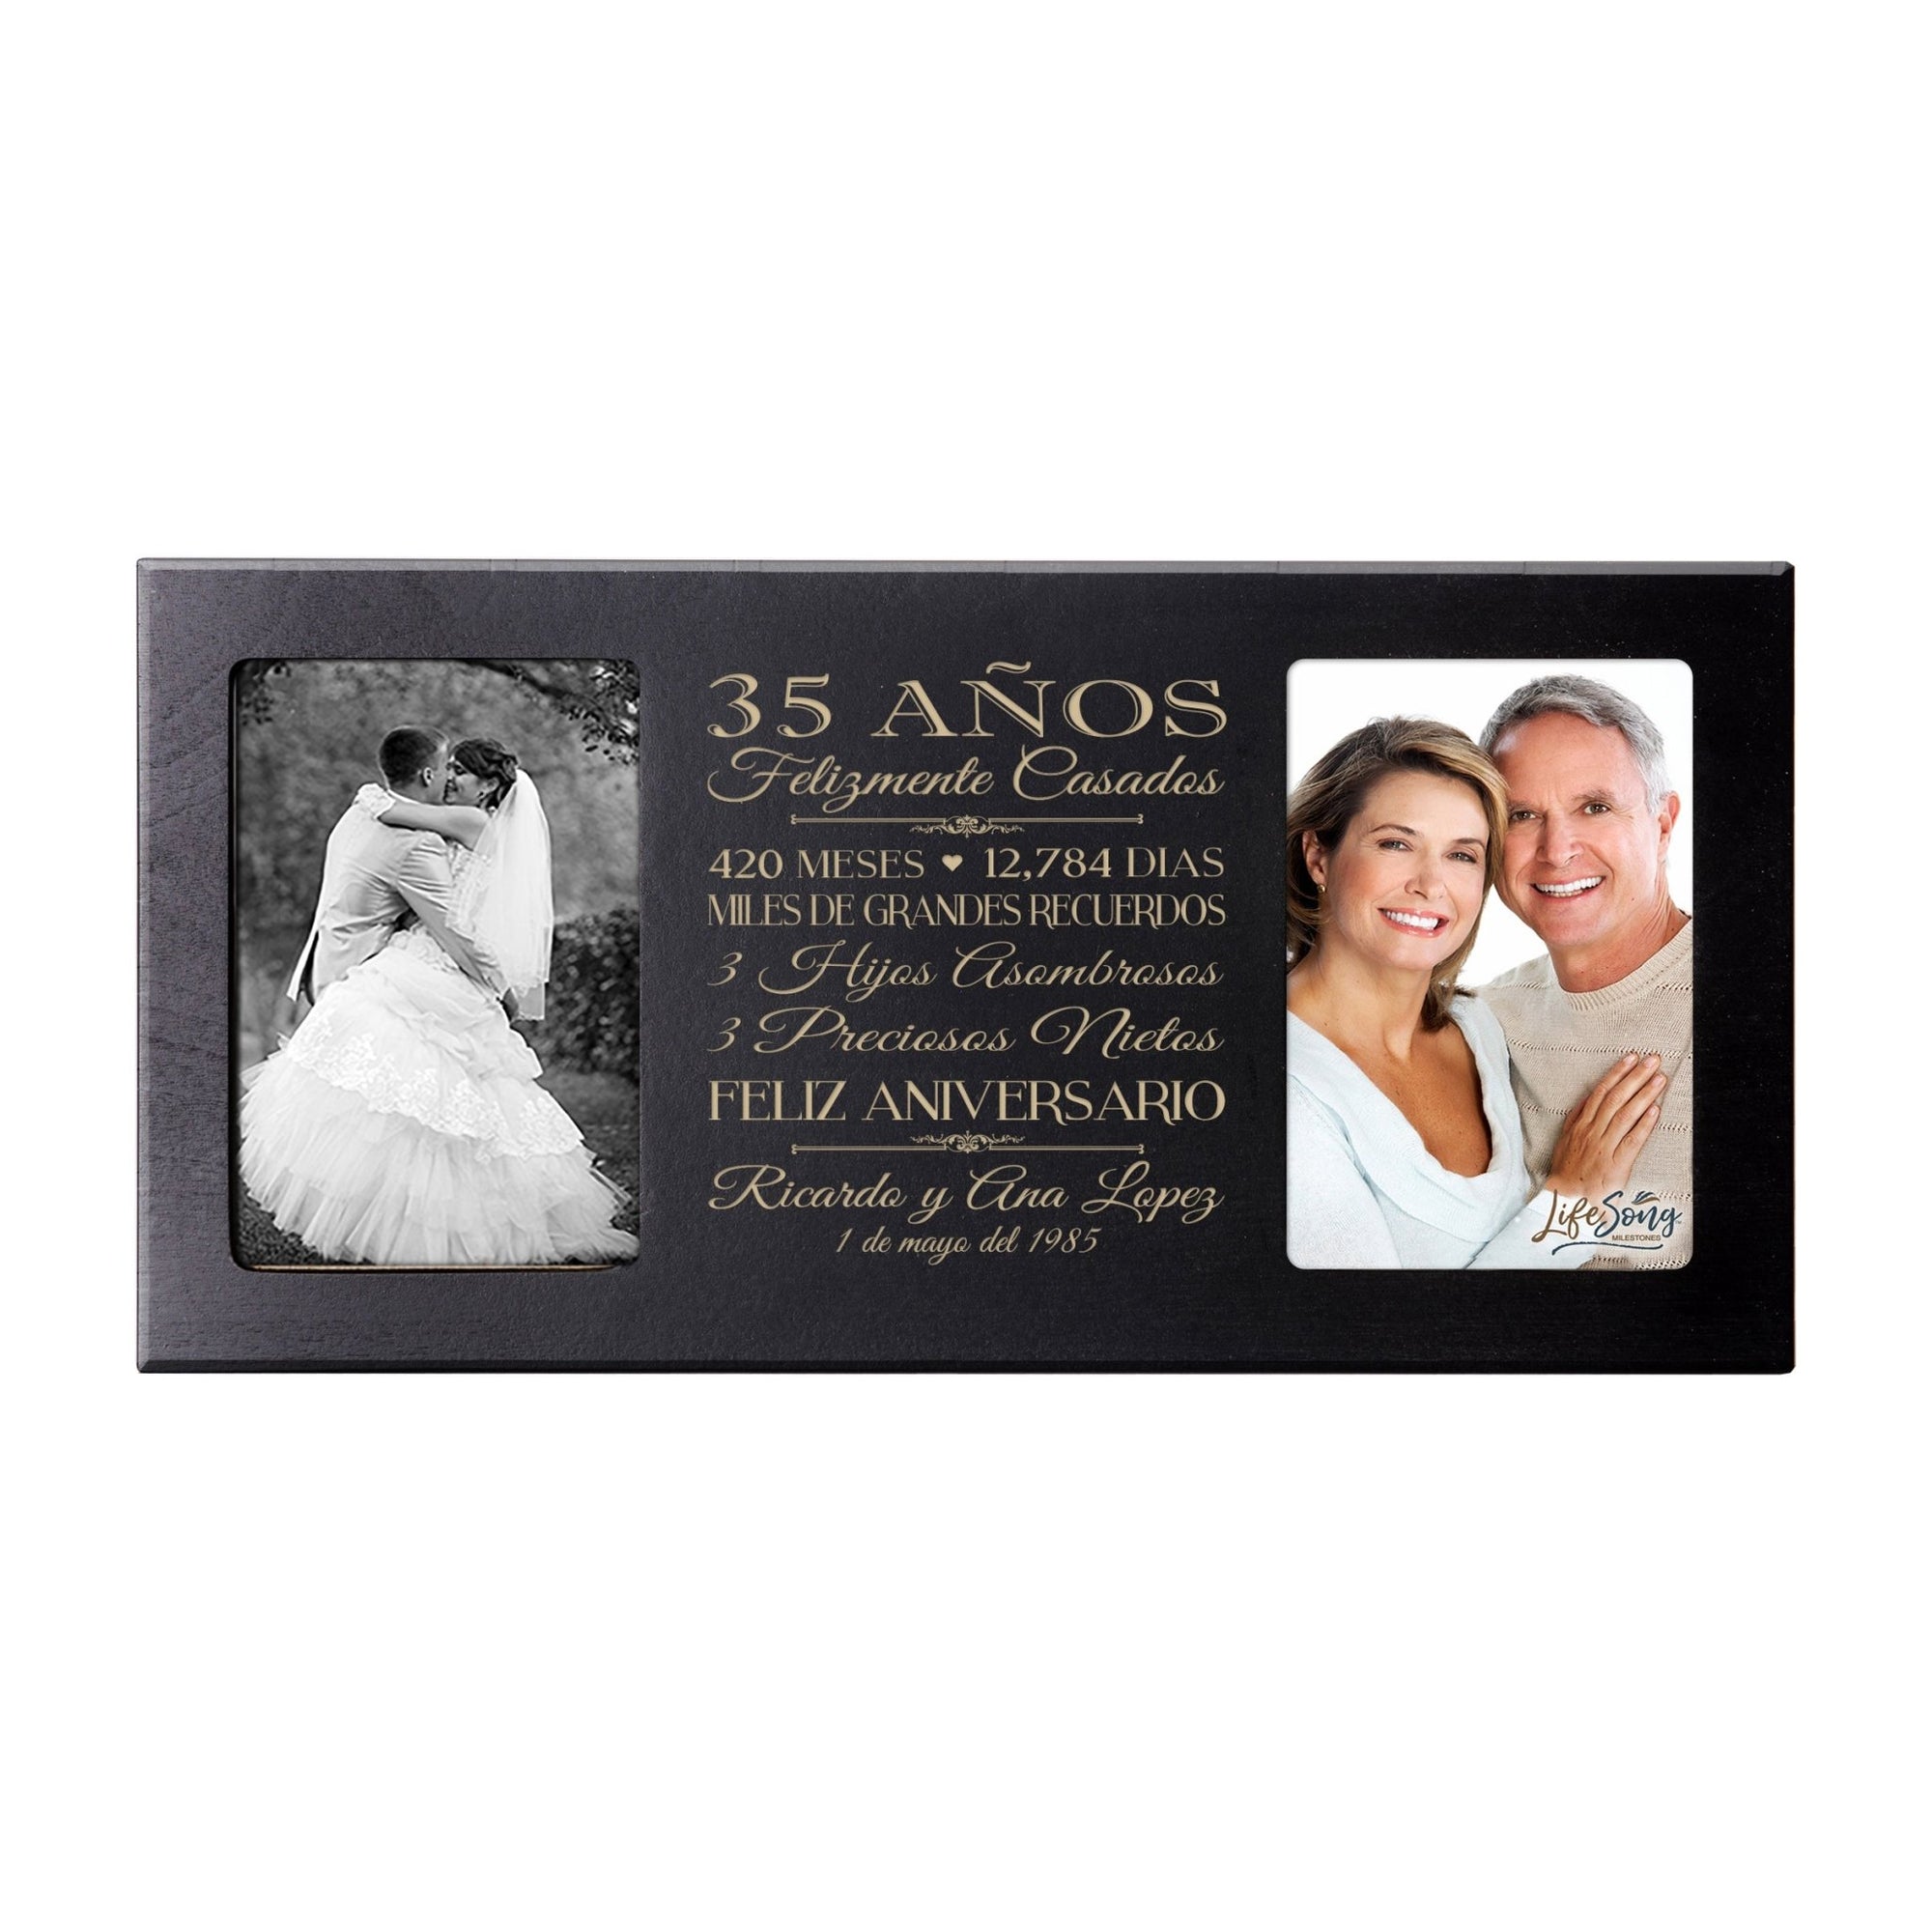 Lifesong Milestones Personalized Couples 35th Wedding Anniversary Spanish Picture Frame